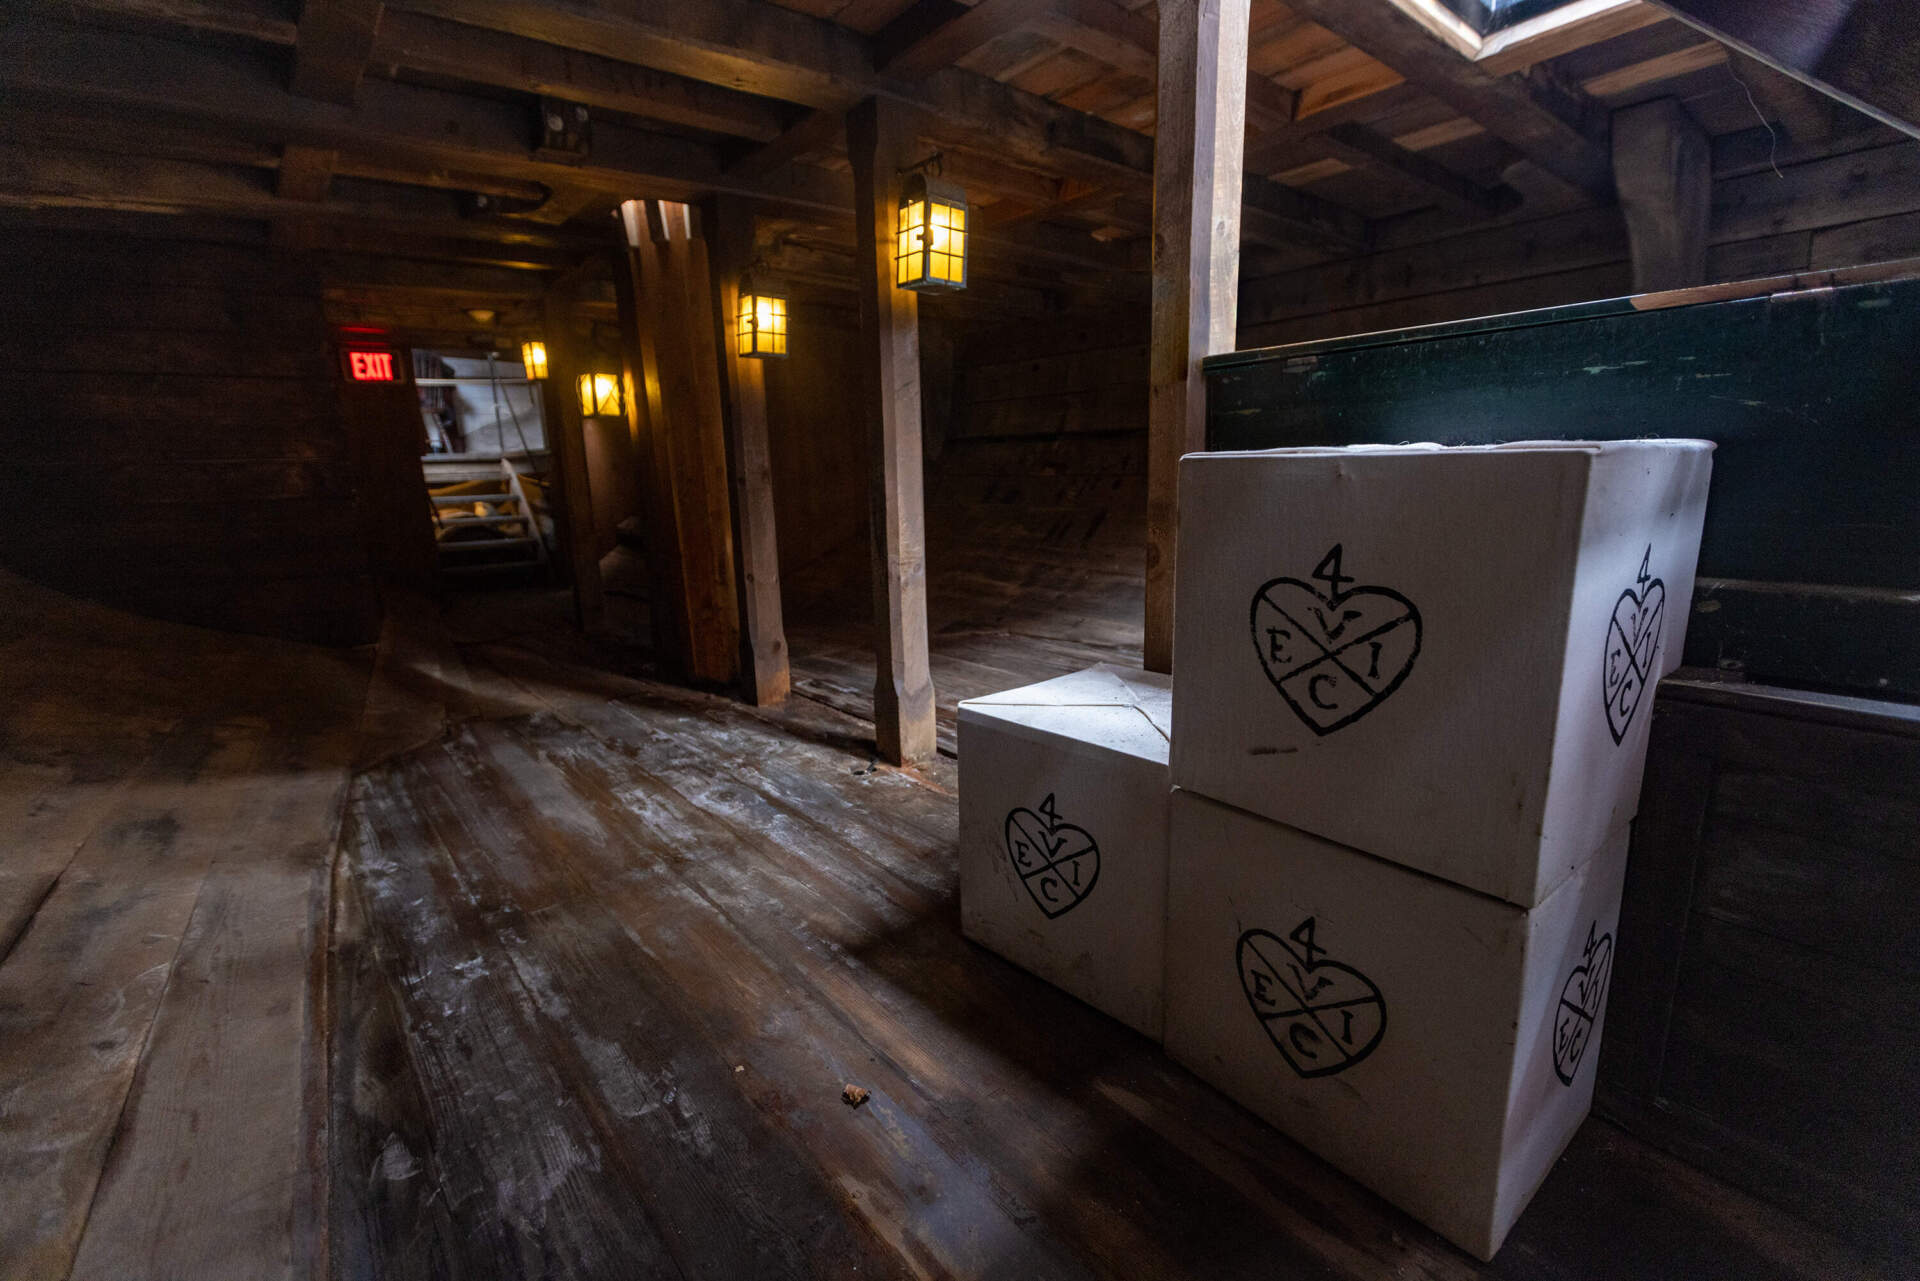 Crates with the emblem of the East India Company sit below deck of the brig Beaver at the Boston Tea Party Museum. (Jesse Costa/WBUR)